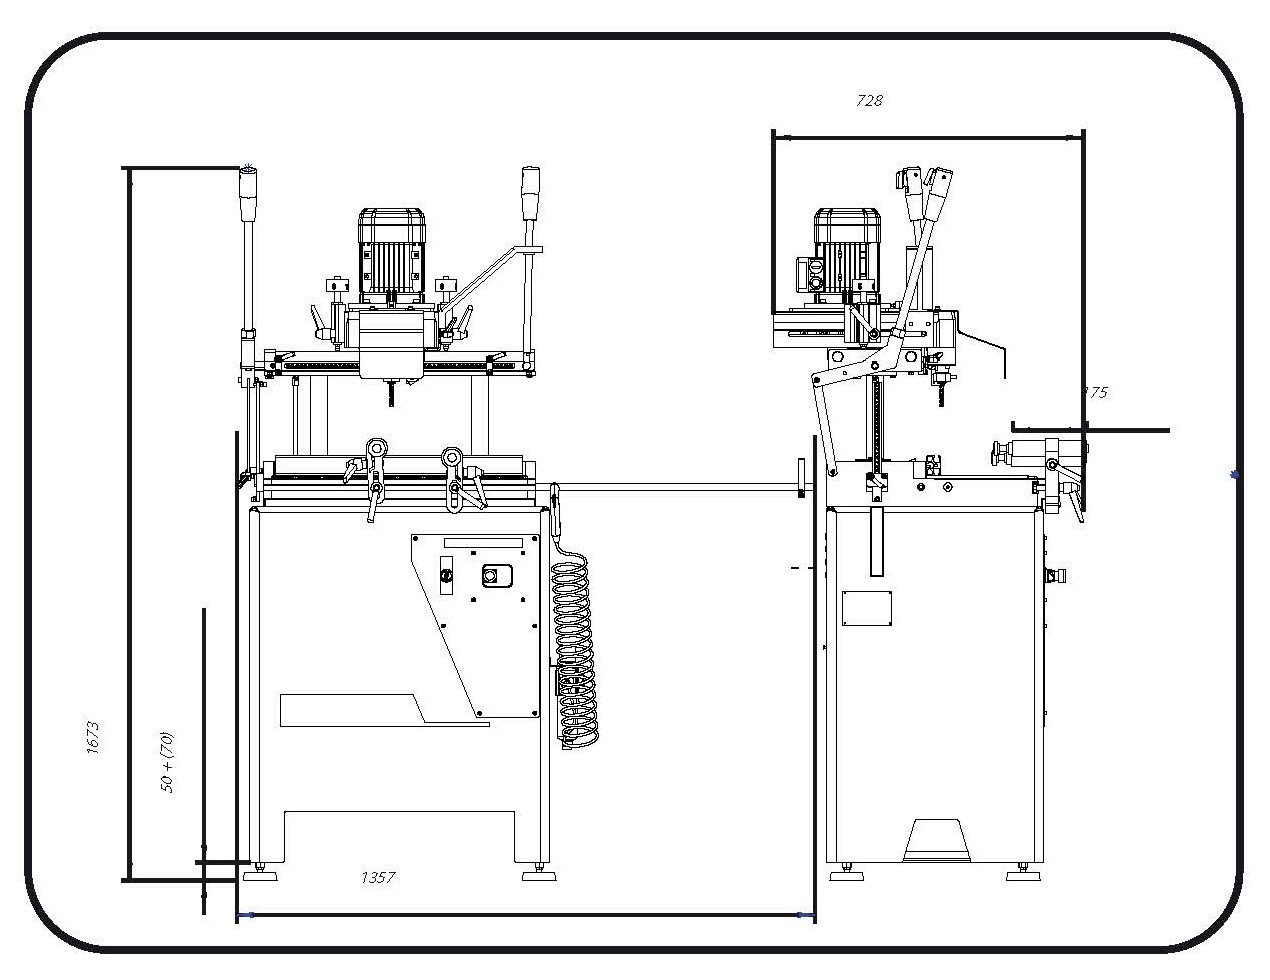 Manual Milling Machine Pneumatics [ Air ] For Light Metal 1.1kw 220v 60hz  - Made In Italy